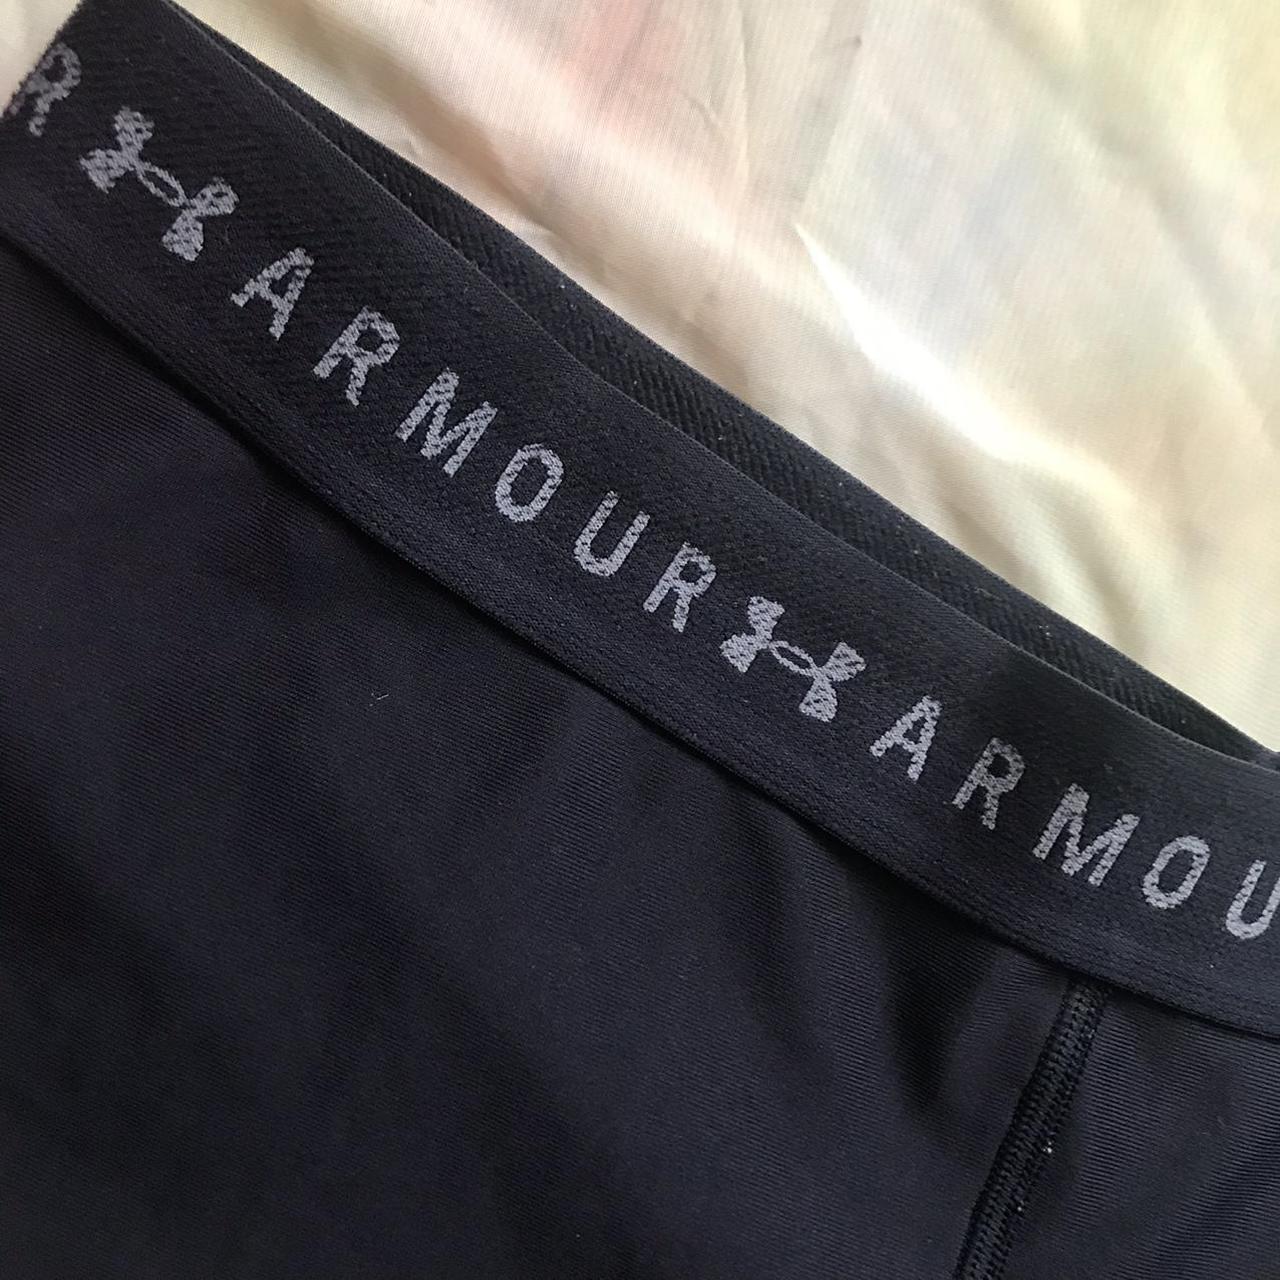 Product Image 3 - Under Armour Black Shorts 🖤

No